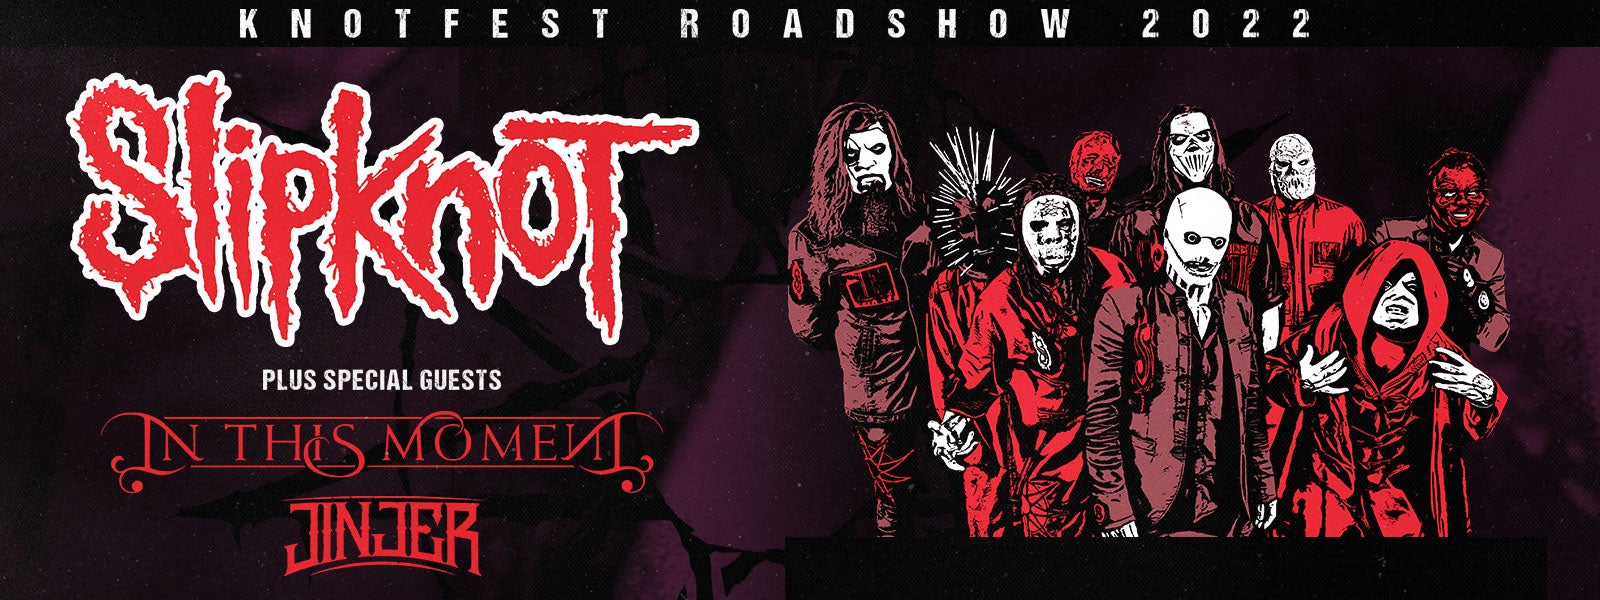 More Info for Knotfest Roadshow